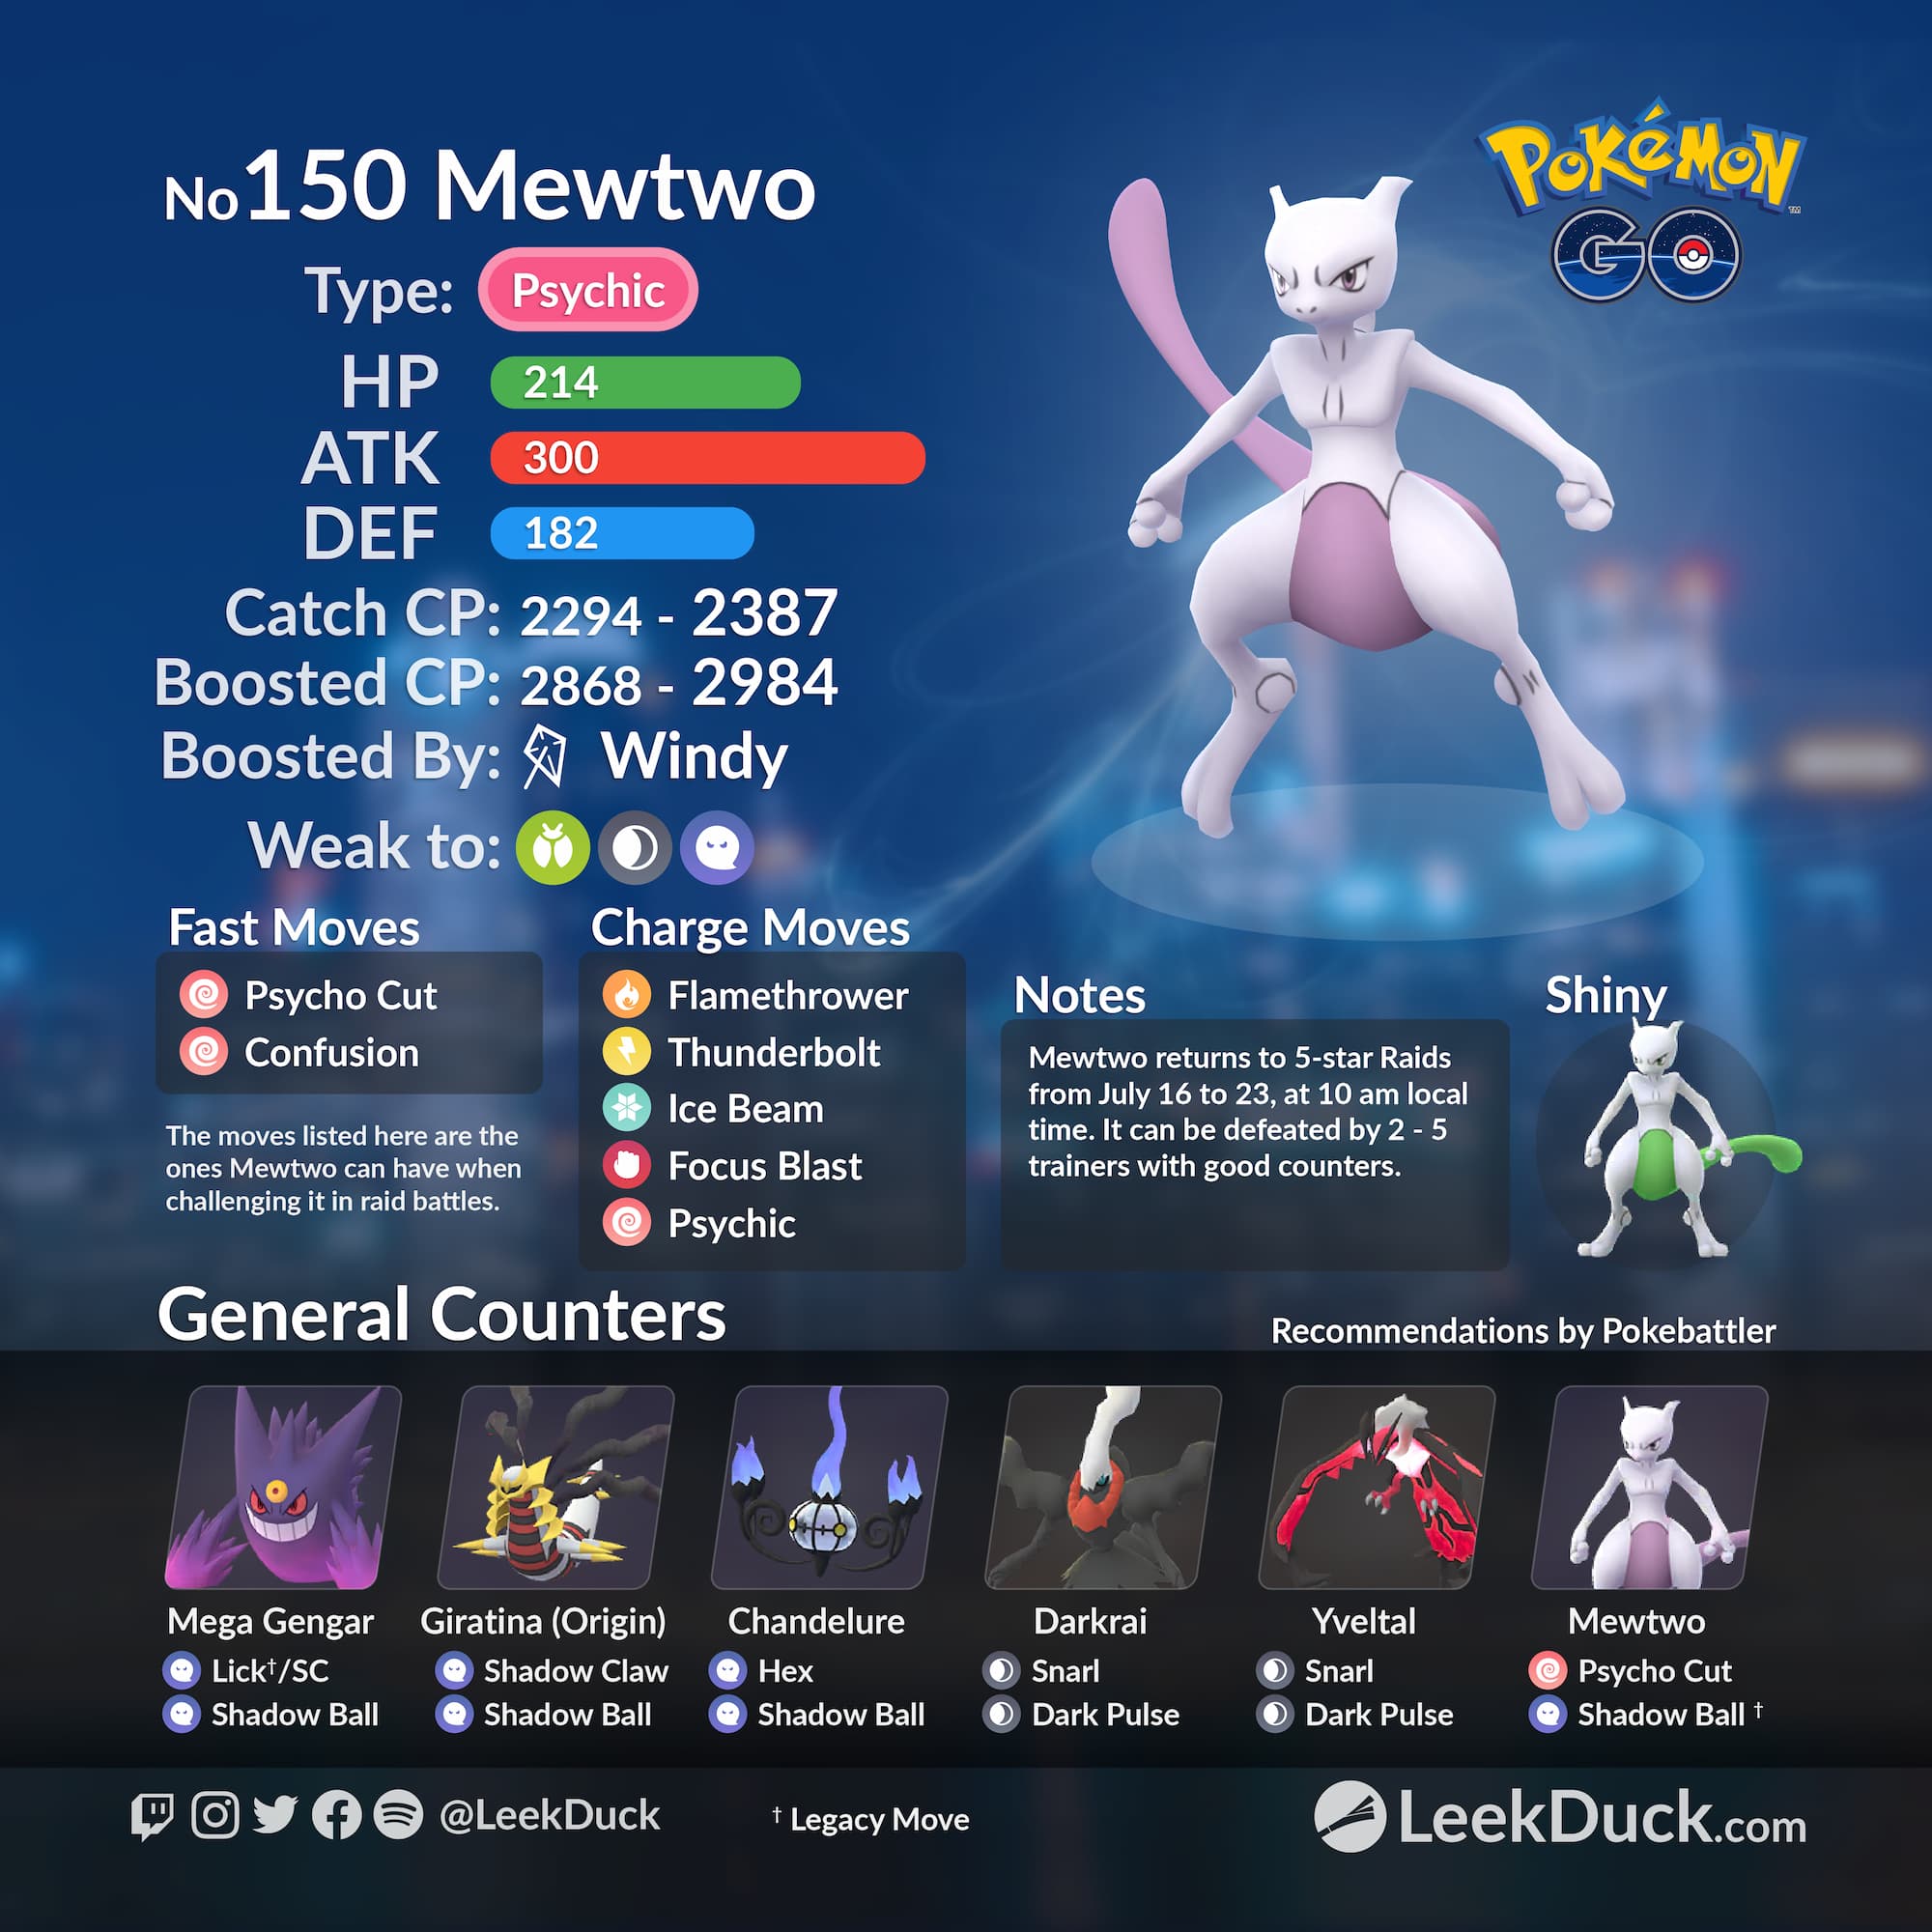 Pokémon Go Mewtwo best moveset and counters raid guide - Polygon